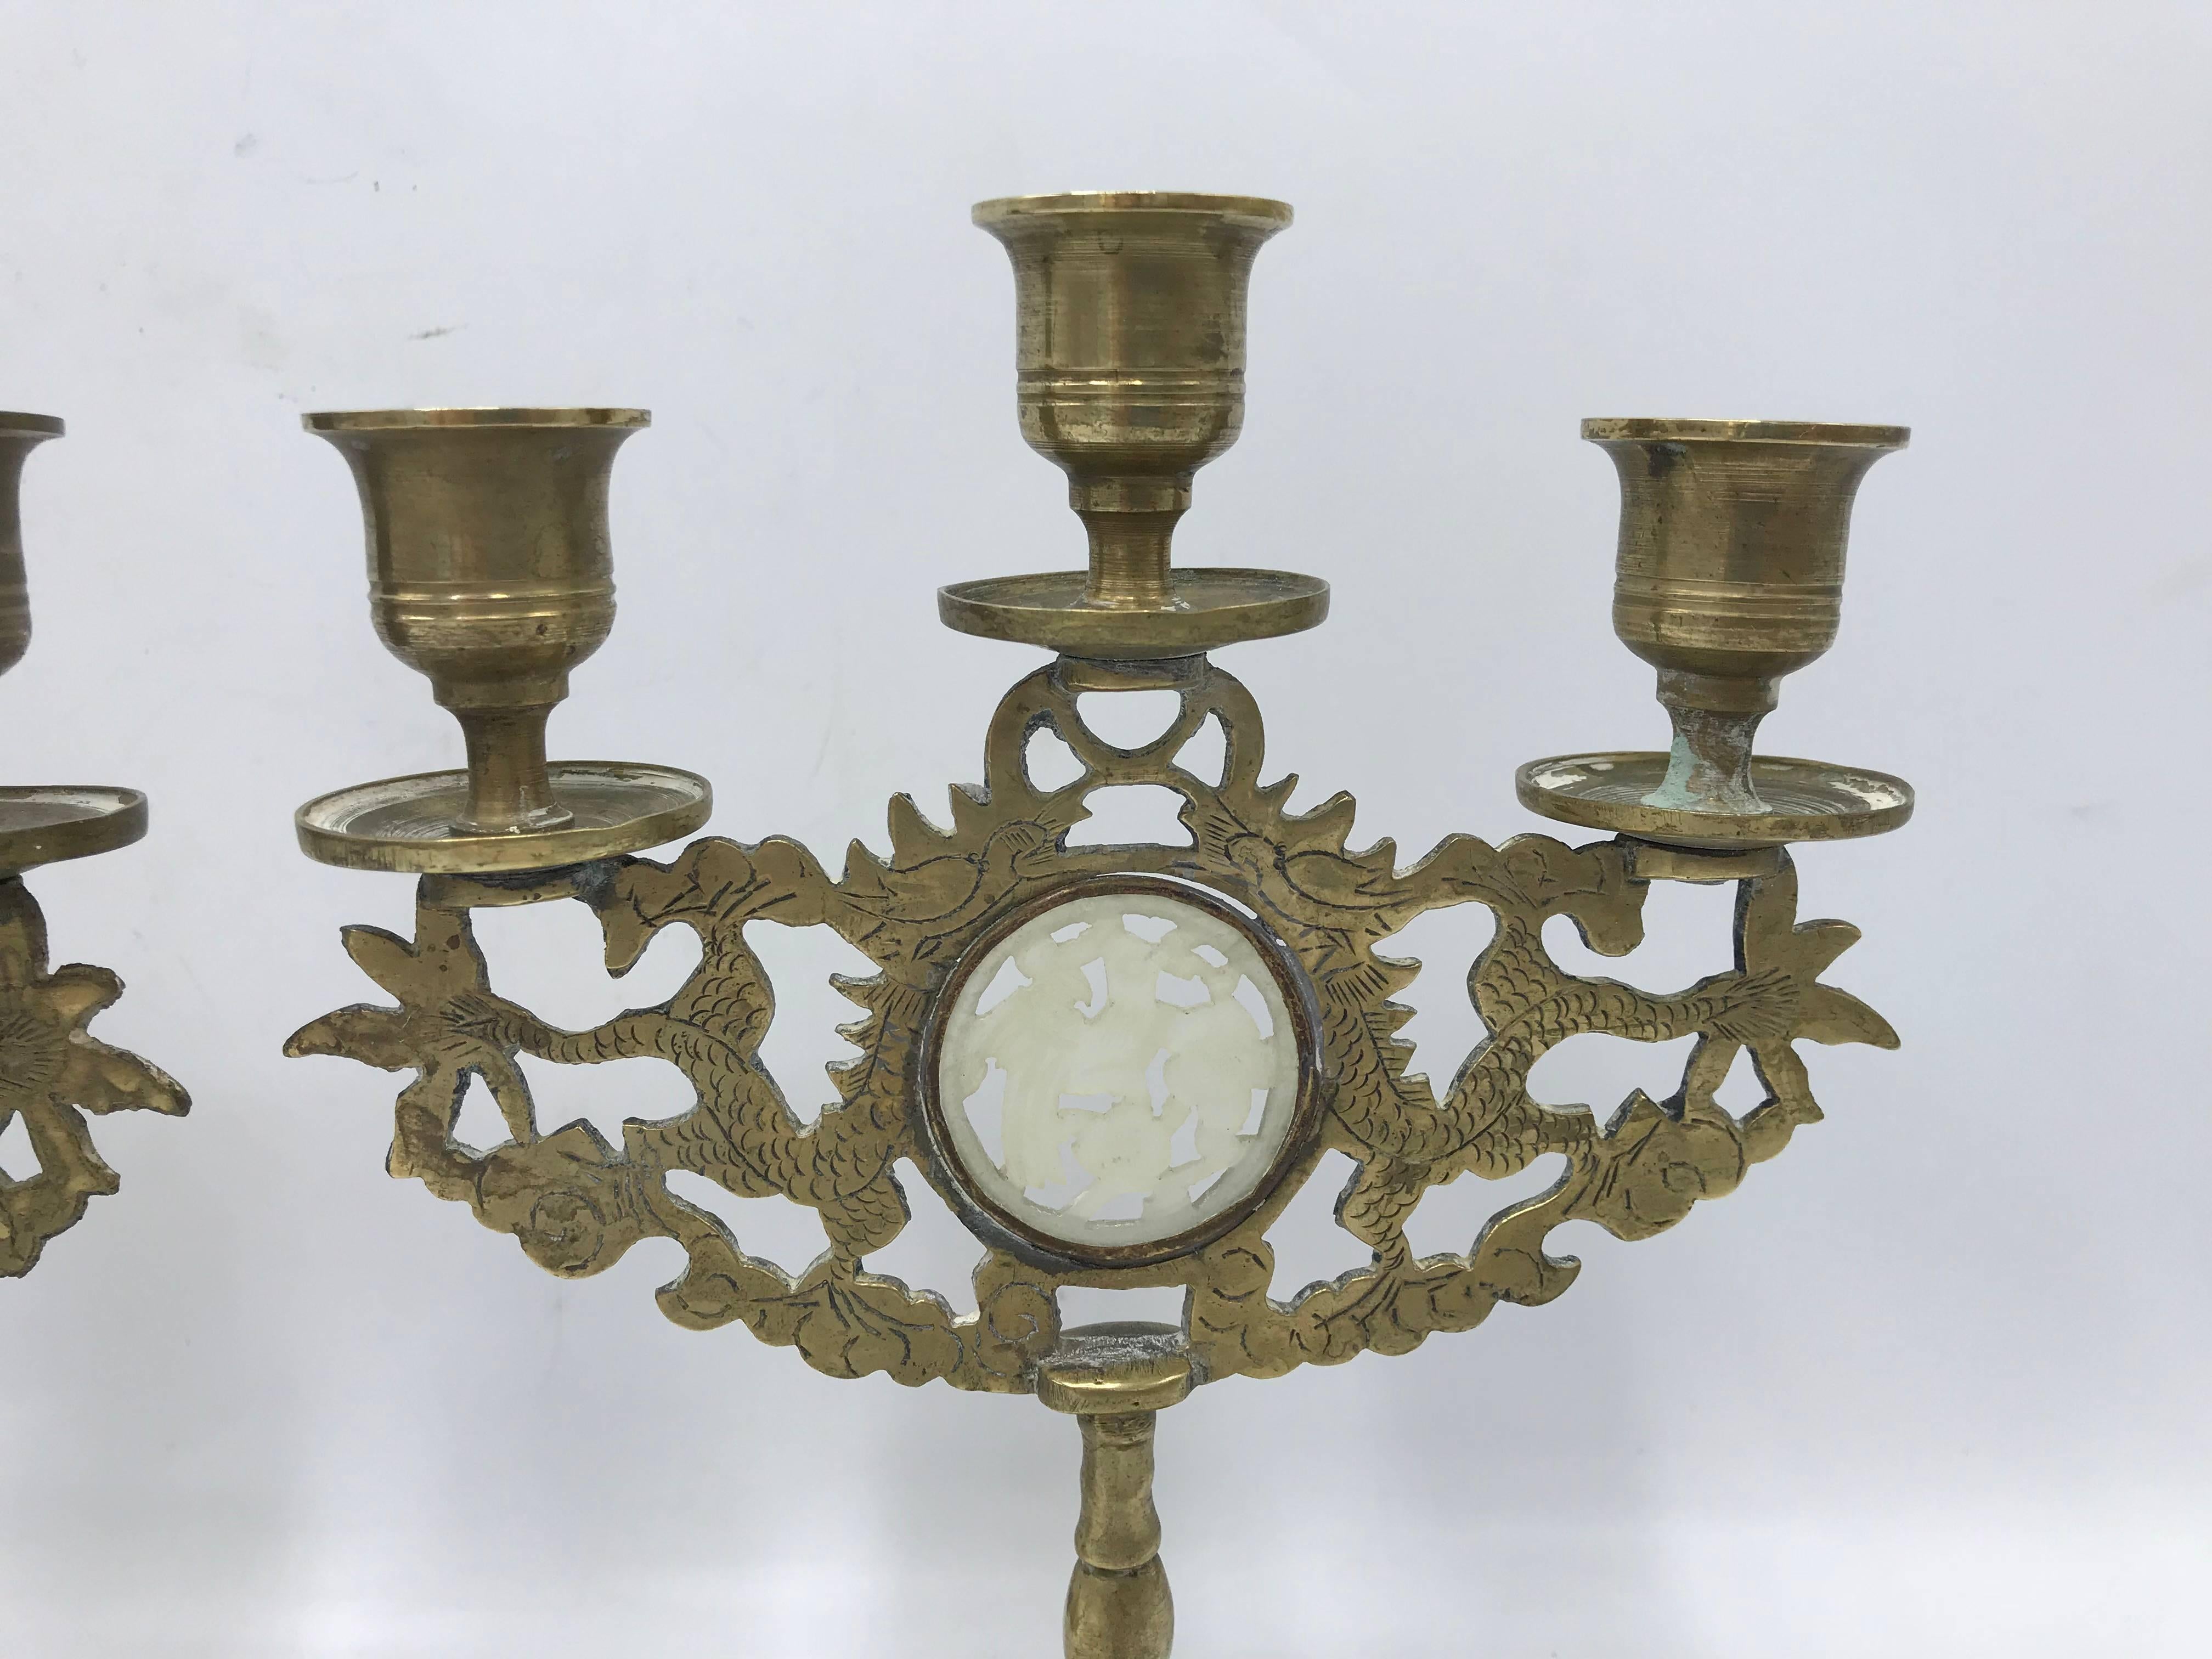 Offered is a gorgeous, pair of 1960s Asian brass three-arm candelabra candlestick holders. Each has a dragon motif with a jade insert. Marked 'China' on underside.